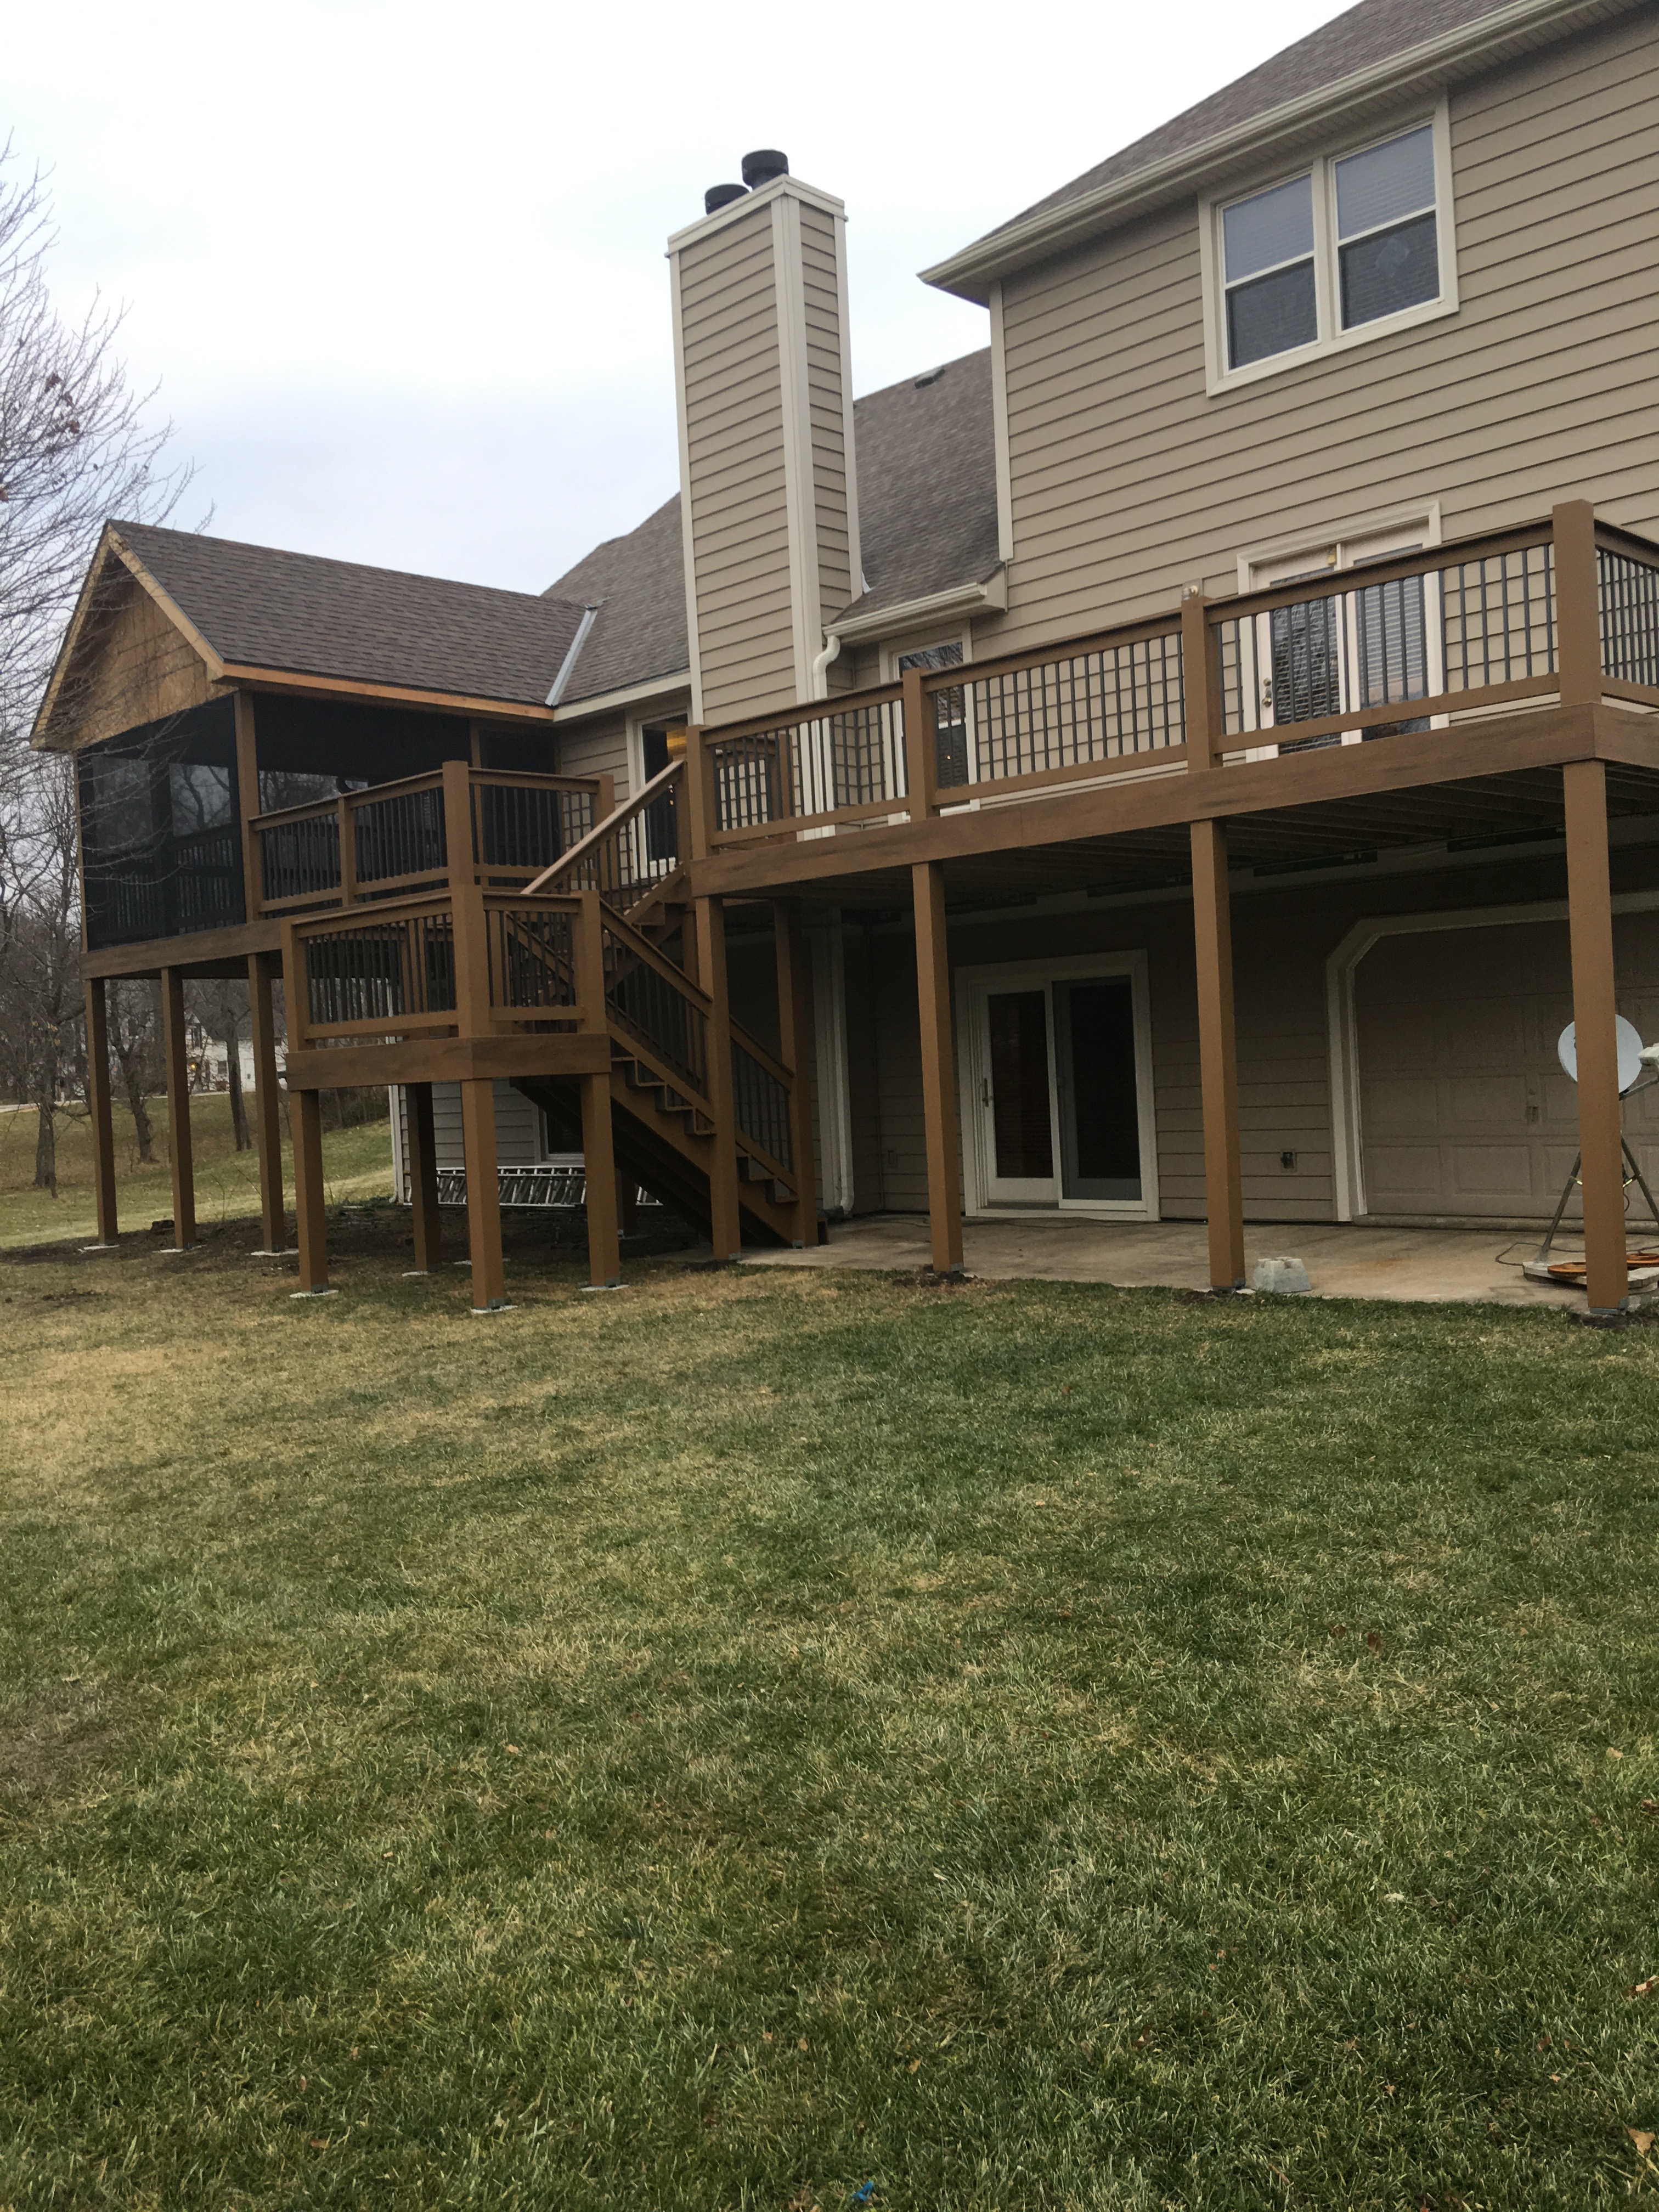 Screened Deck With a Roof Stairs and extended porch